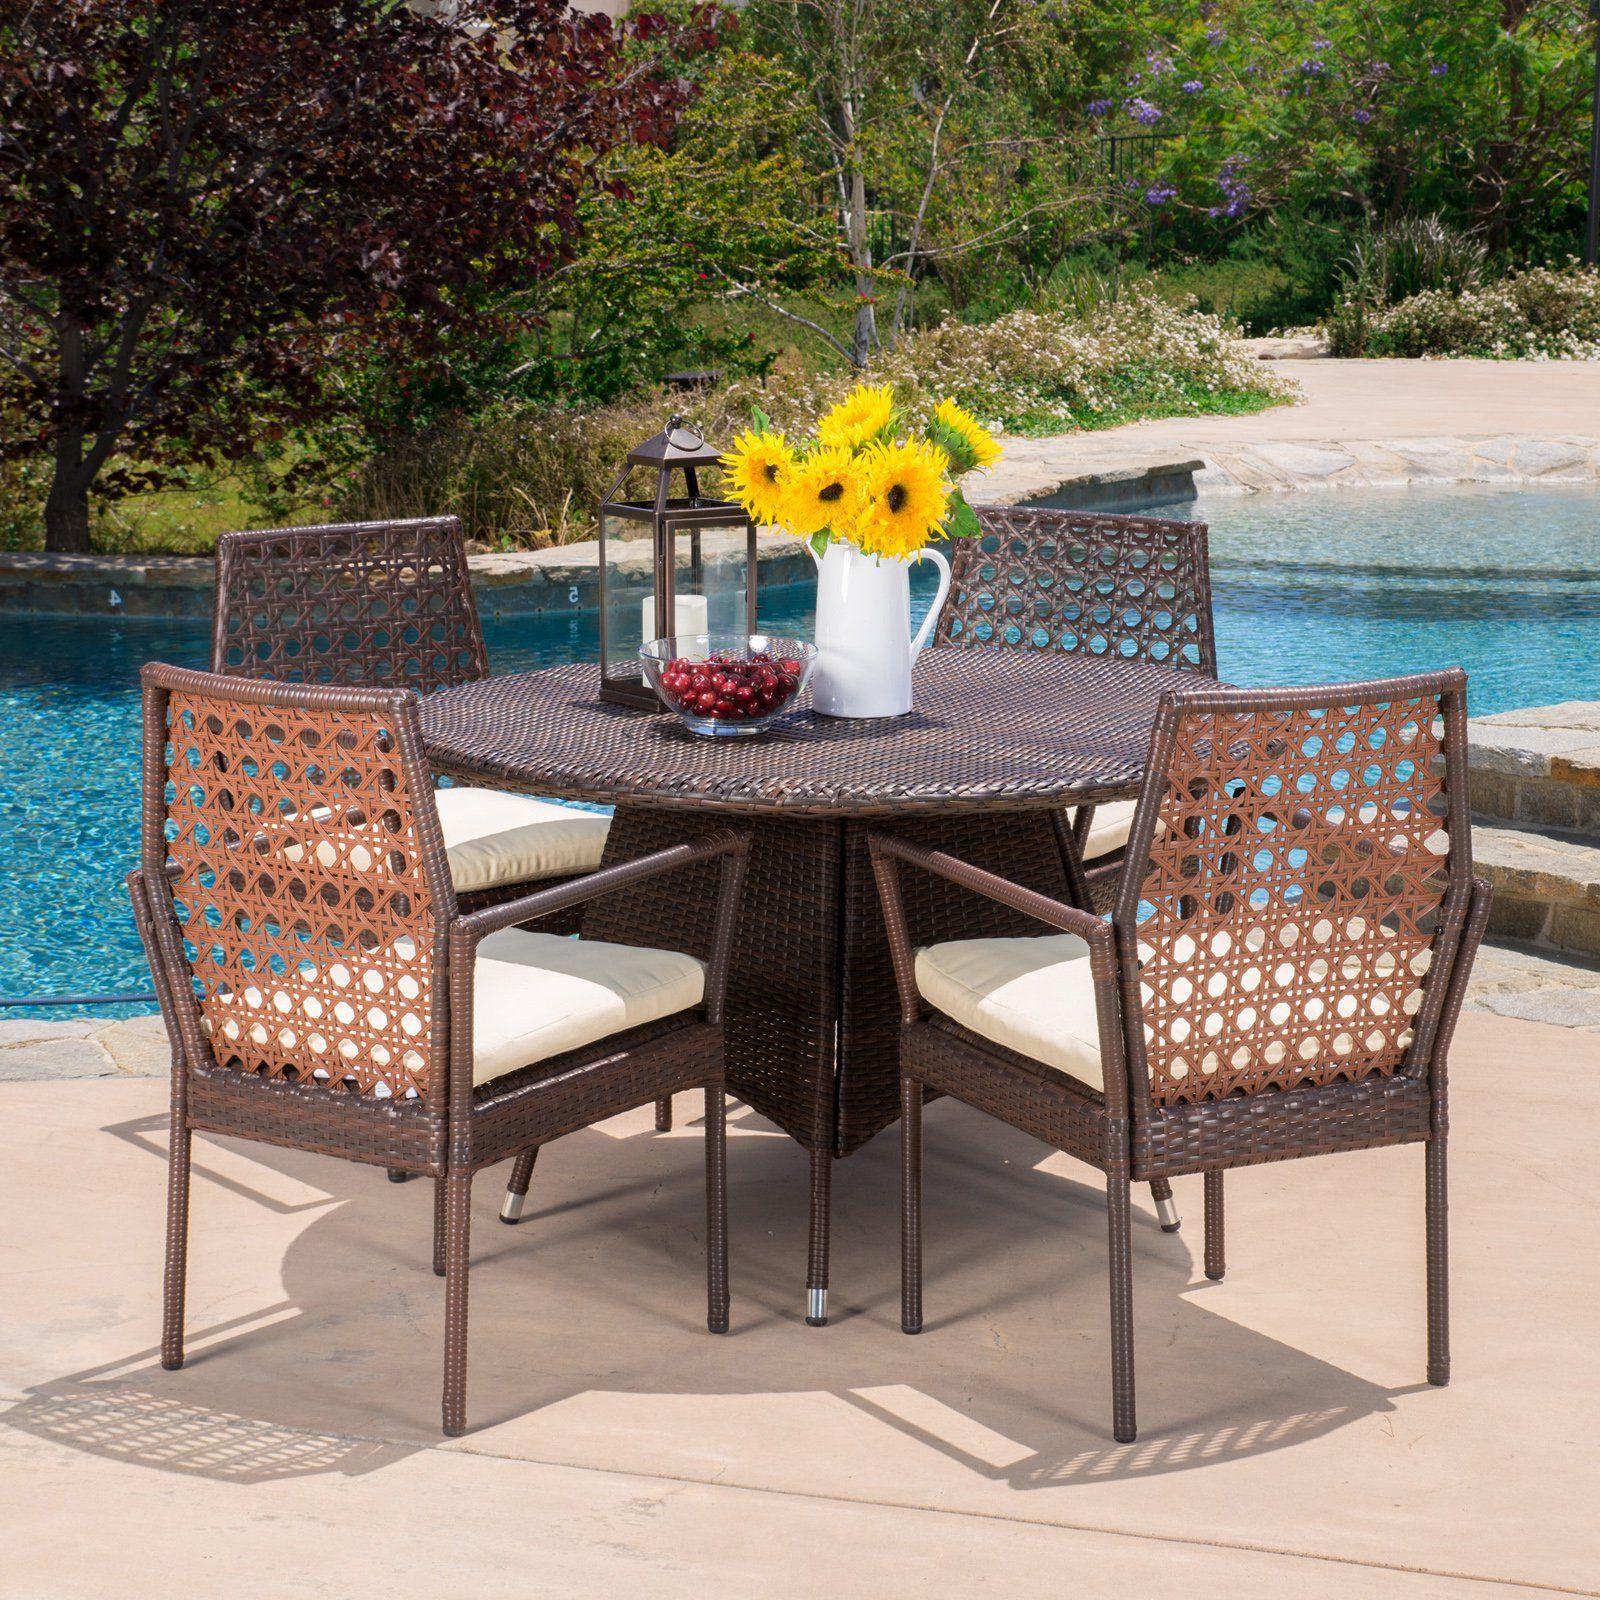 Claire Wicker 5 Piece Round Patio Dining Set With Cushion – Walmart With Regard To Best And Newest 5 Piece Round Dining Sets (View 12 of 15)